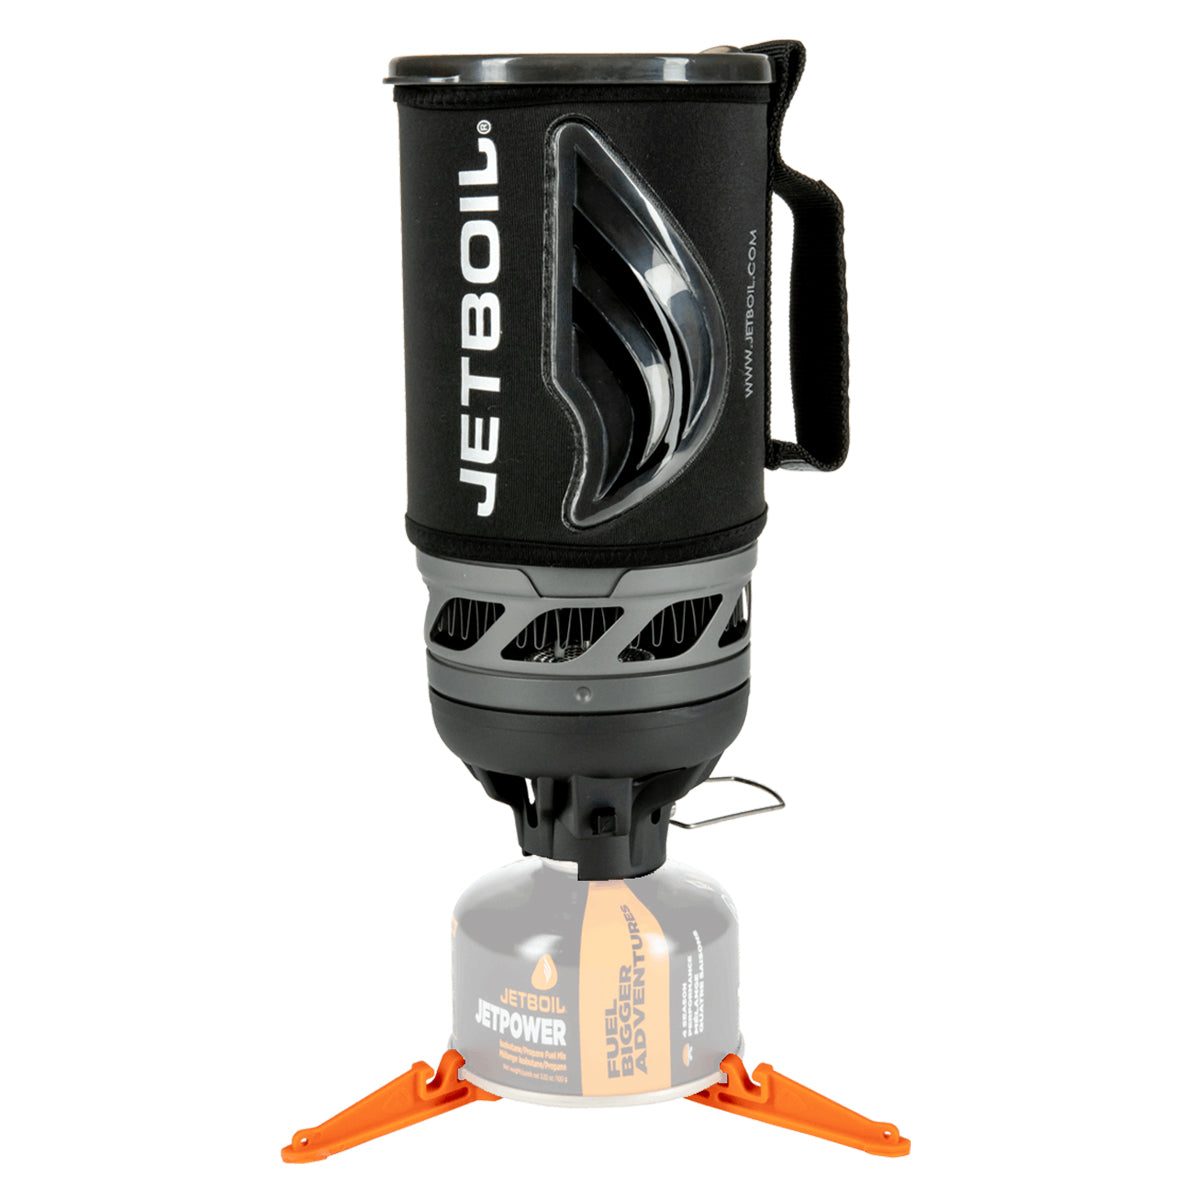 Jetboil Flash Stove System by Jetboil | Camping - goHUNT Shop